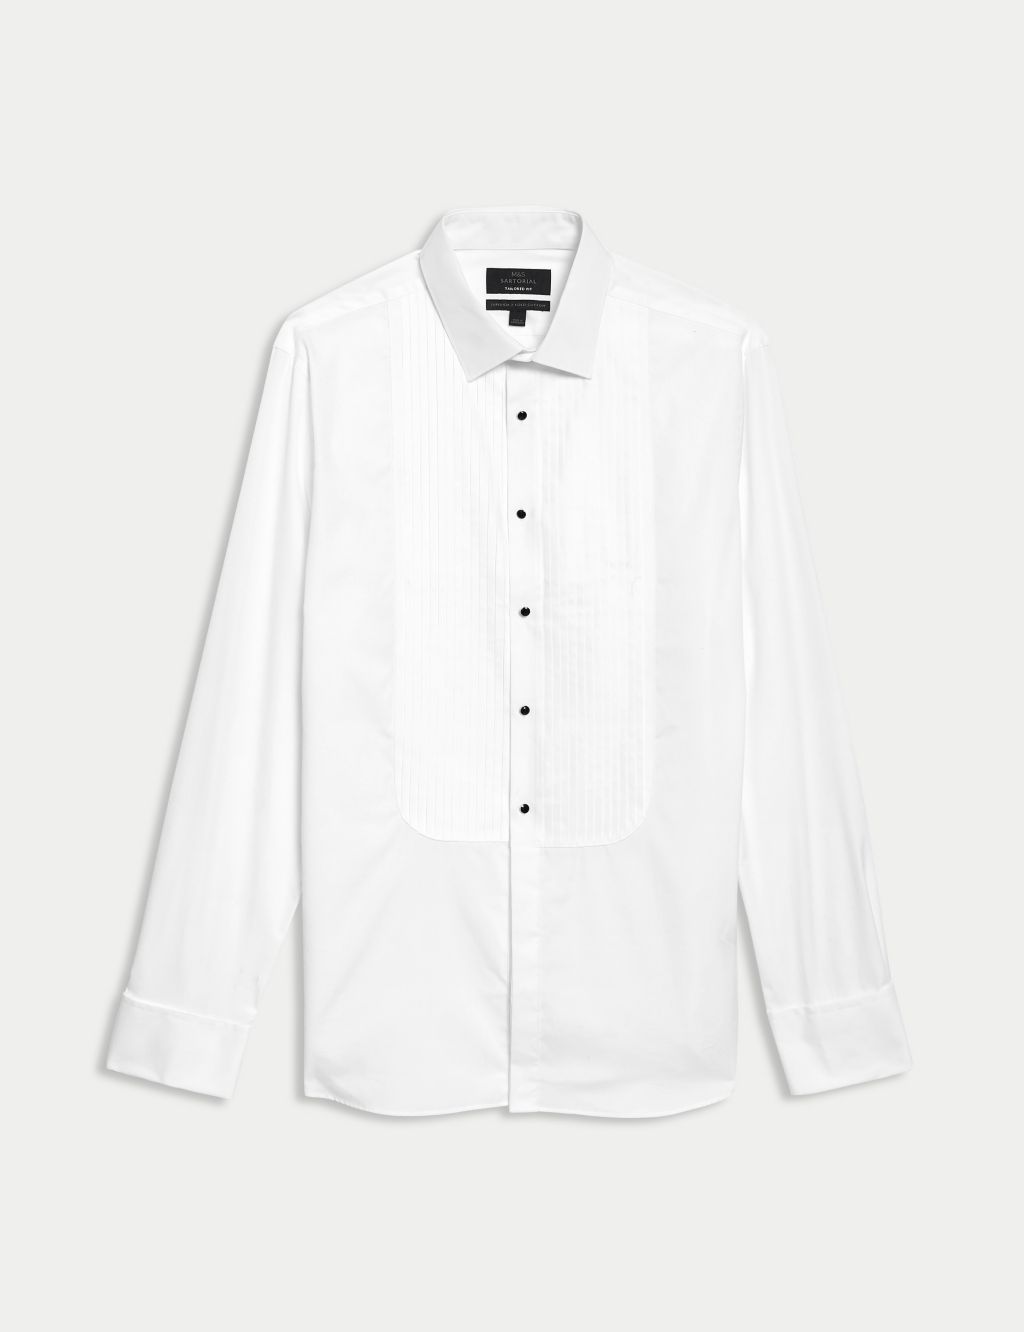 Tailored Fit Easy Iron Pure Cotton Dress Shirt image 1